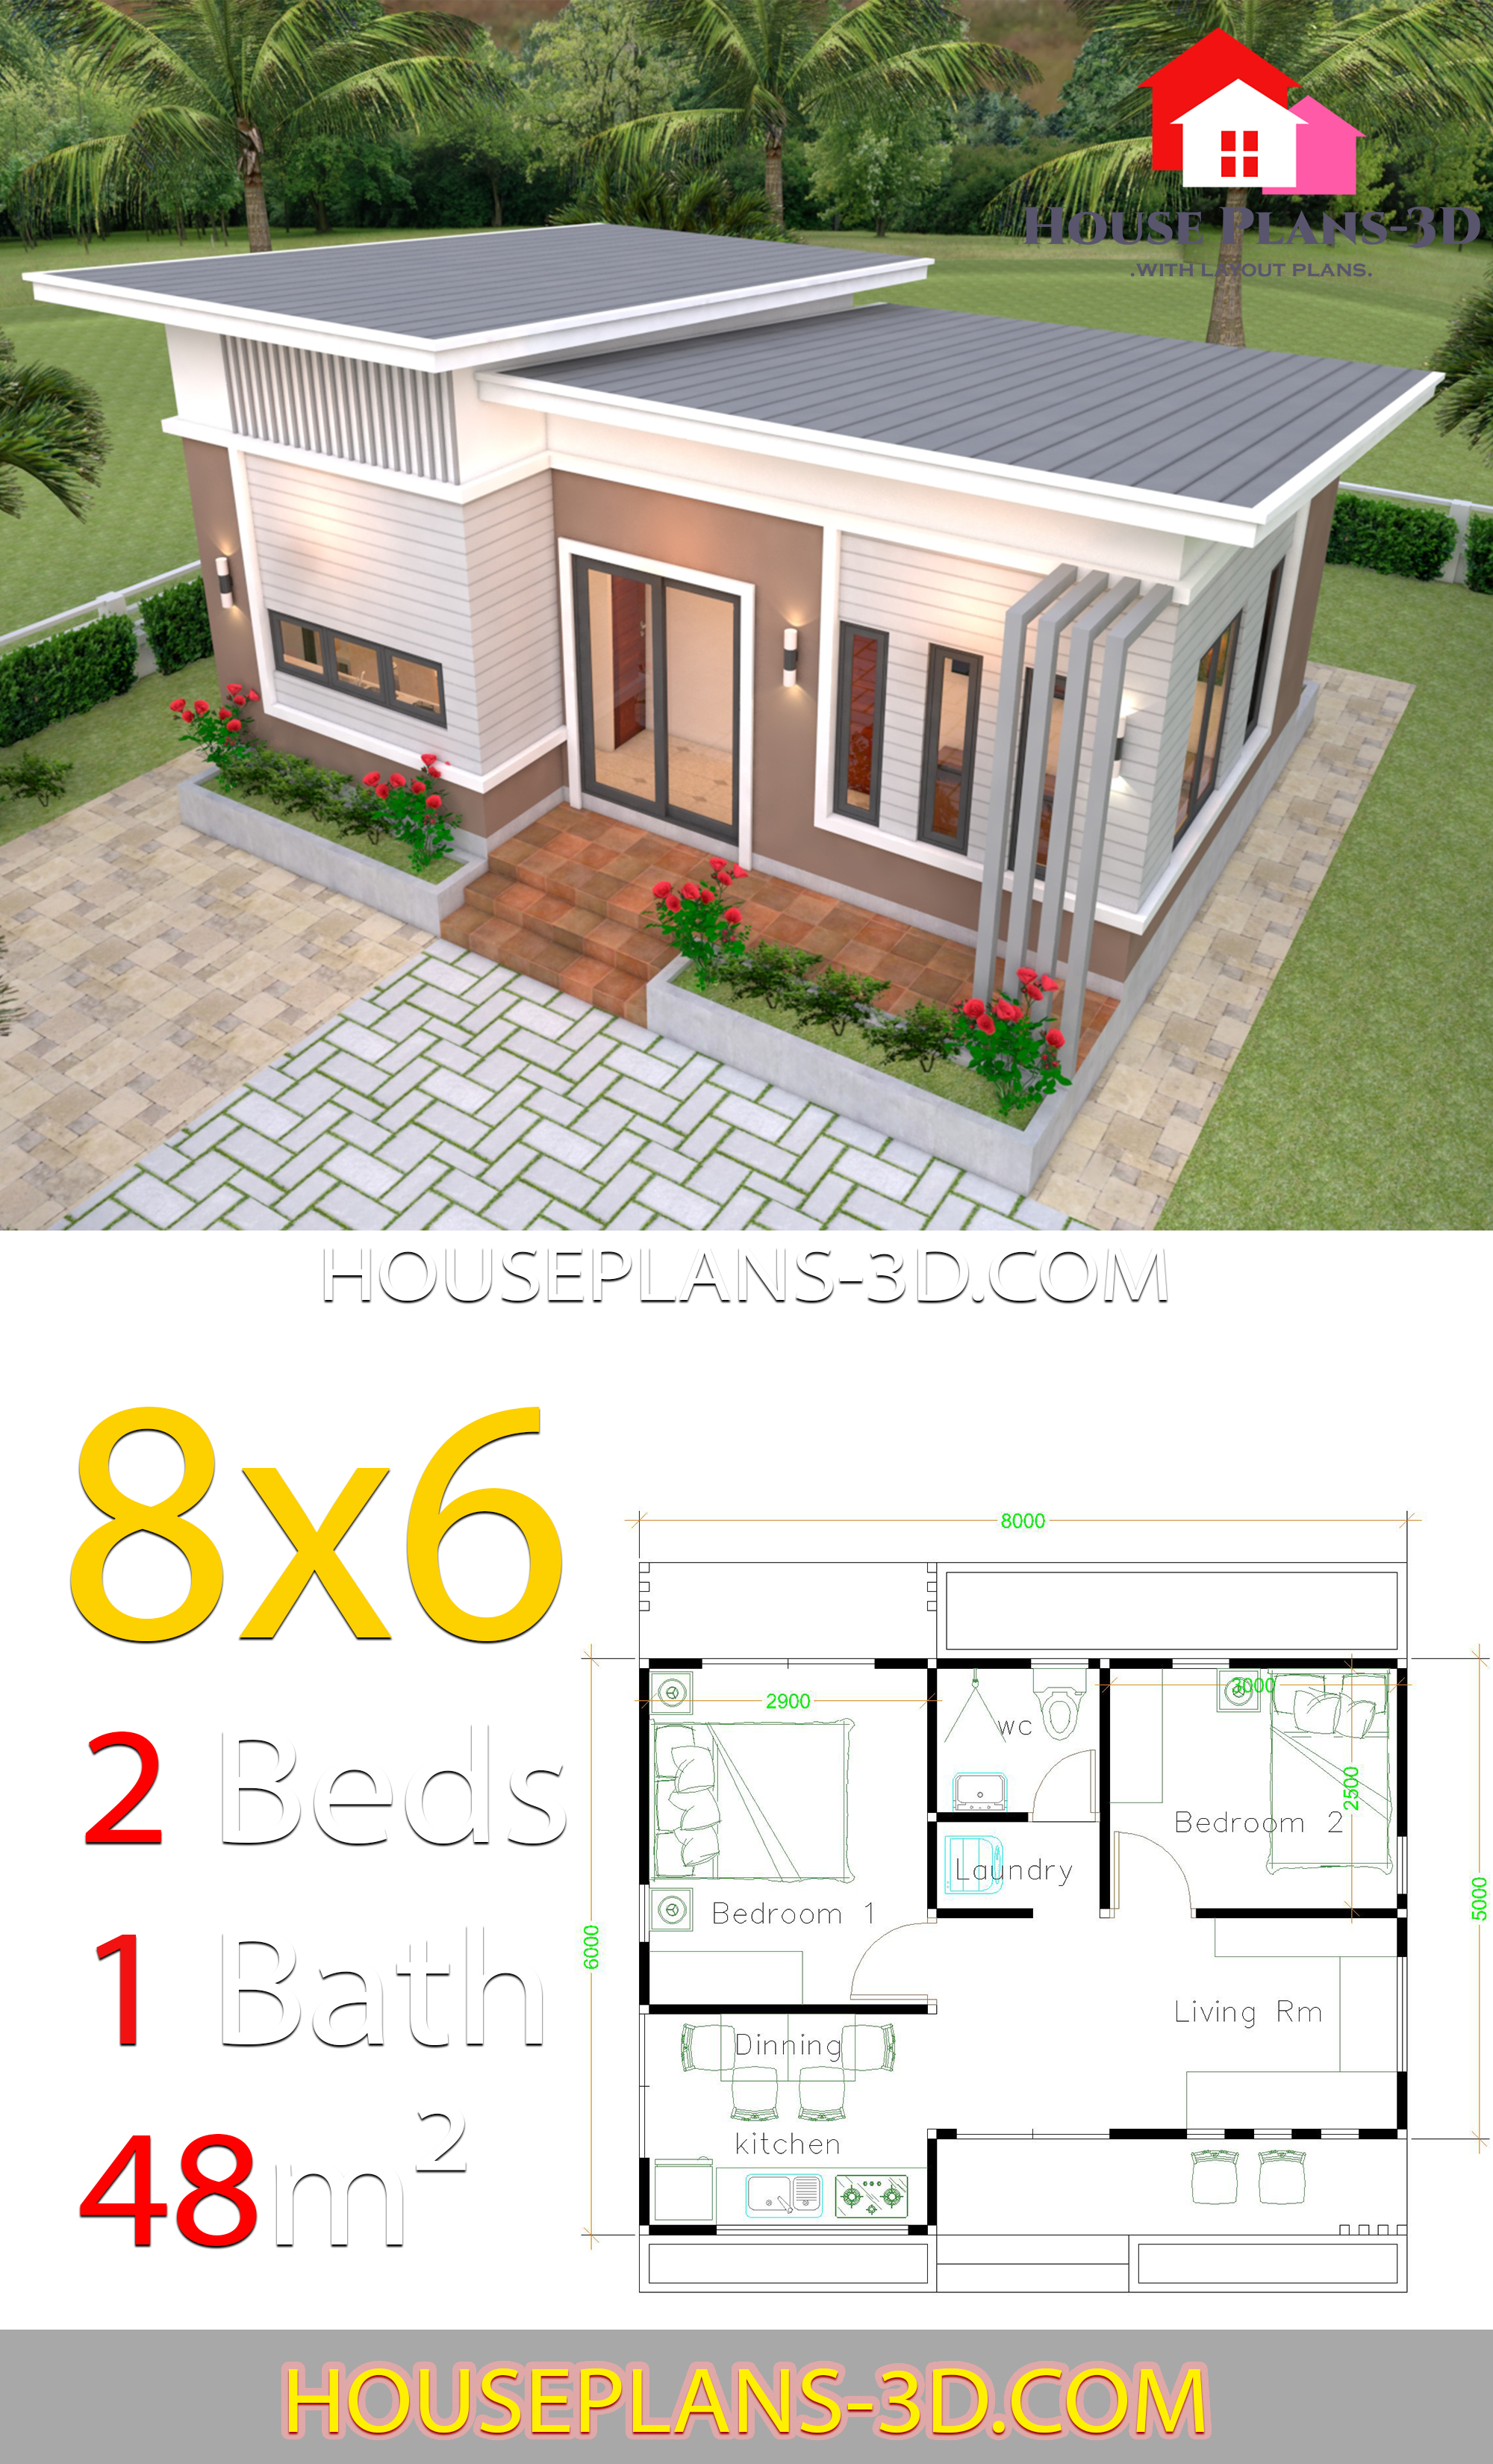 House Plans 8x6 with 2 Bedrooms Slope roof - House Plans 3D